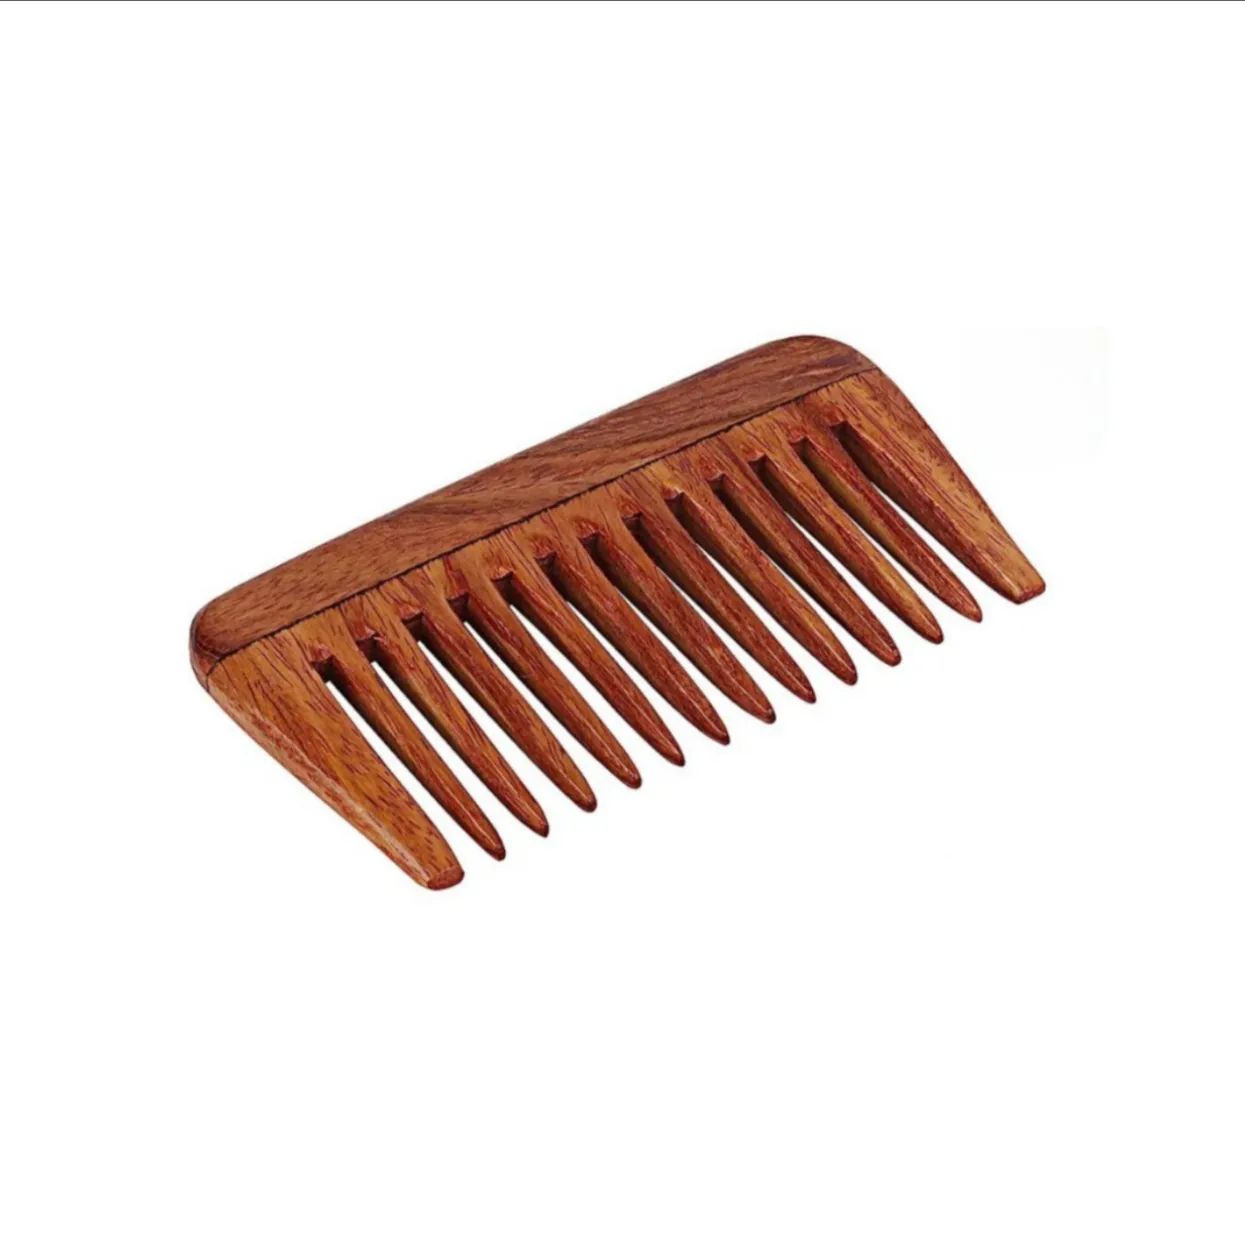 Wide tooth comb by sww woodentreasure